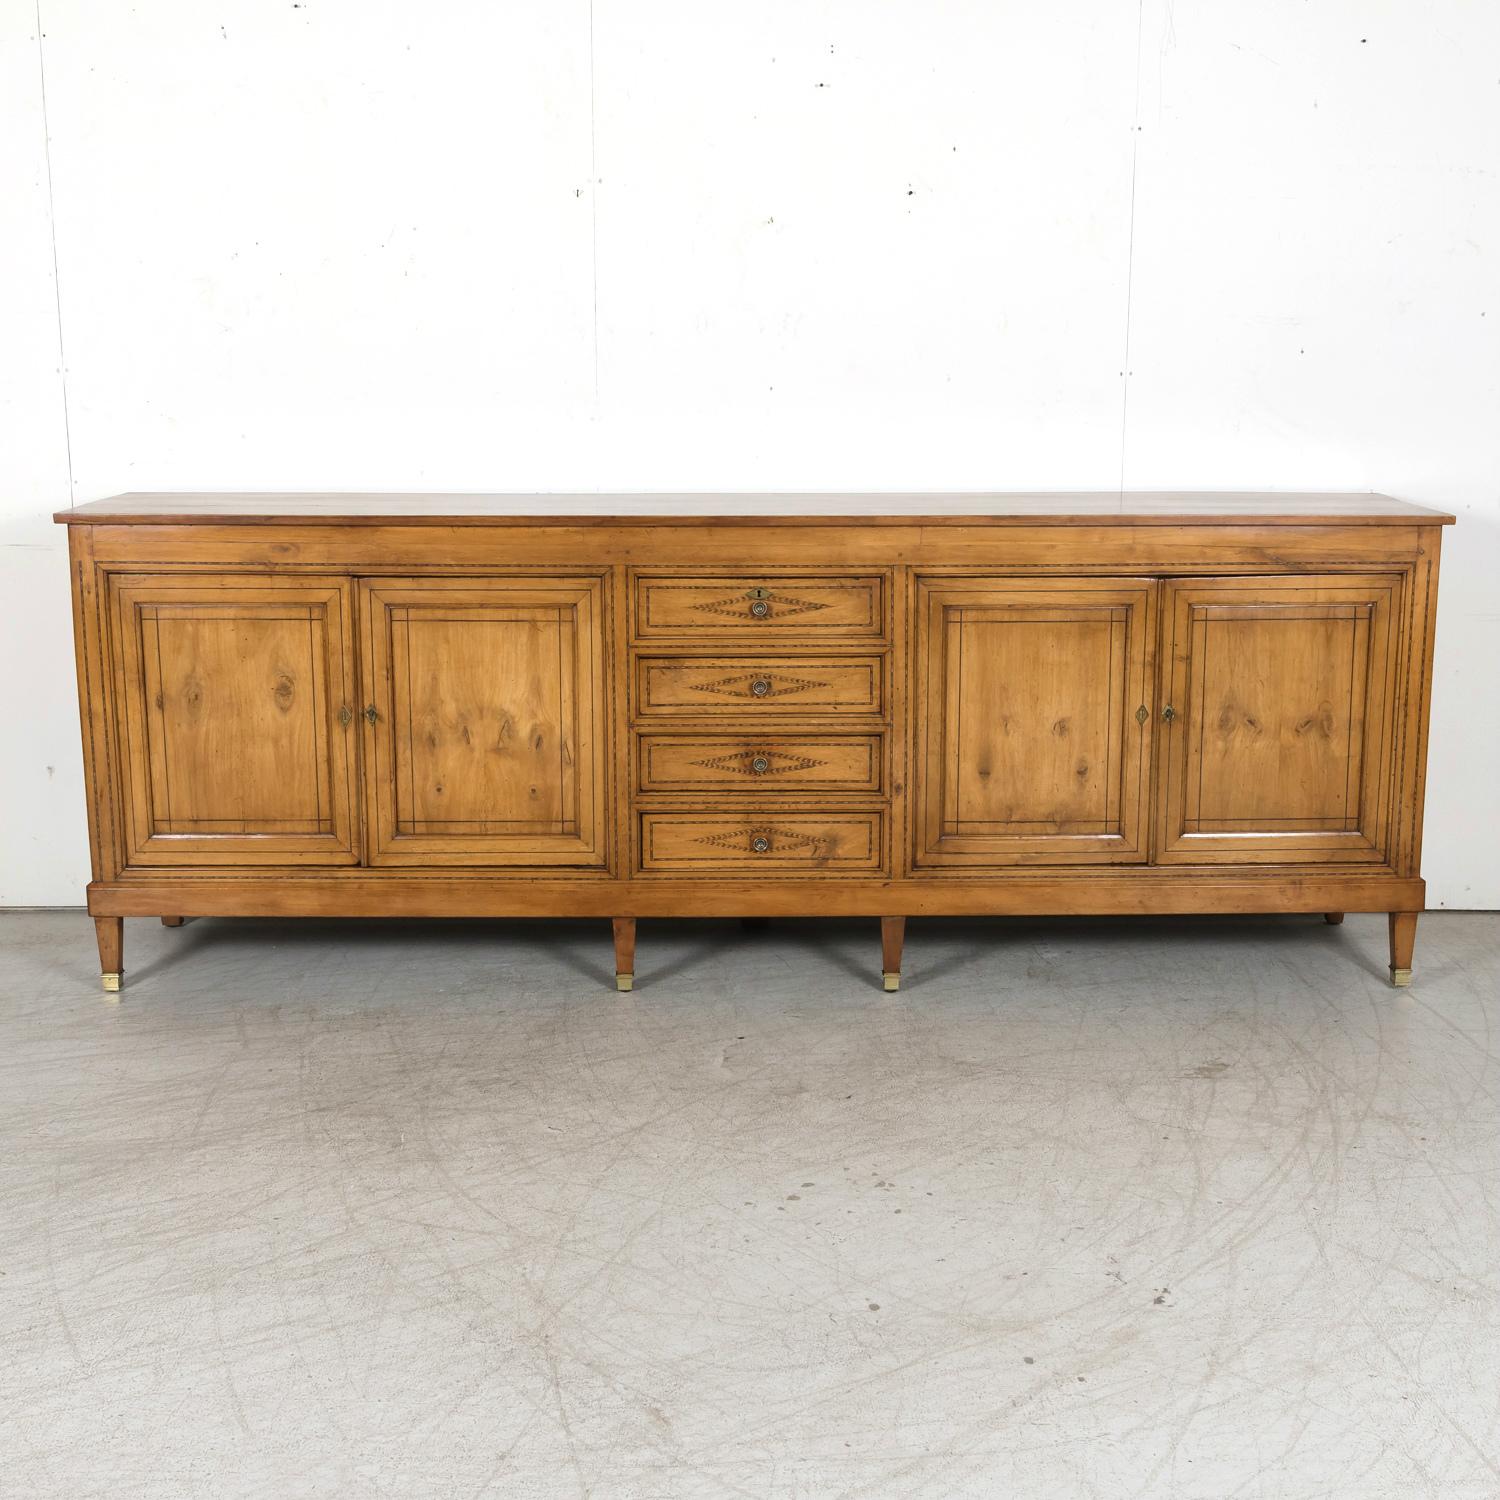 A grand scale 19th century French Provençal Louis XVI style enfilade buffet handcrafted of cherry with fruitwood inlay by master cabinet makers near Avignon, circa 1880s. Having a rectangular plank top over a center bank of four drawers stacked one